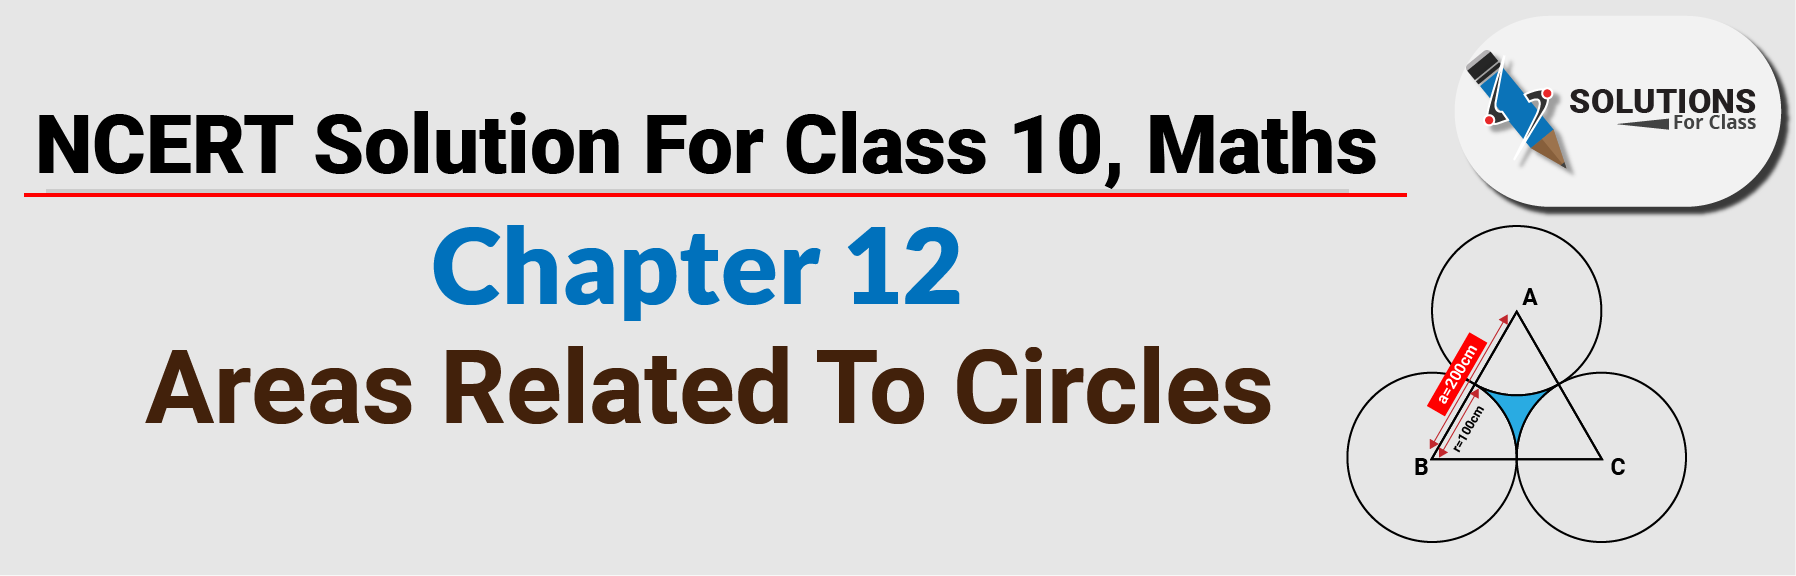 NCERT Solution For Class 10, Maths, Chapter 12, Areas Related To Circles